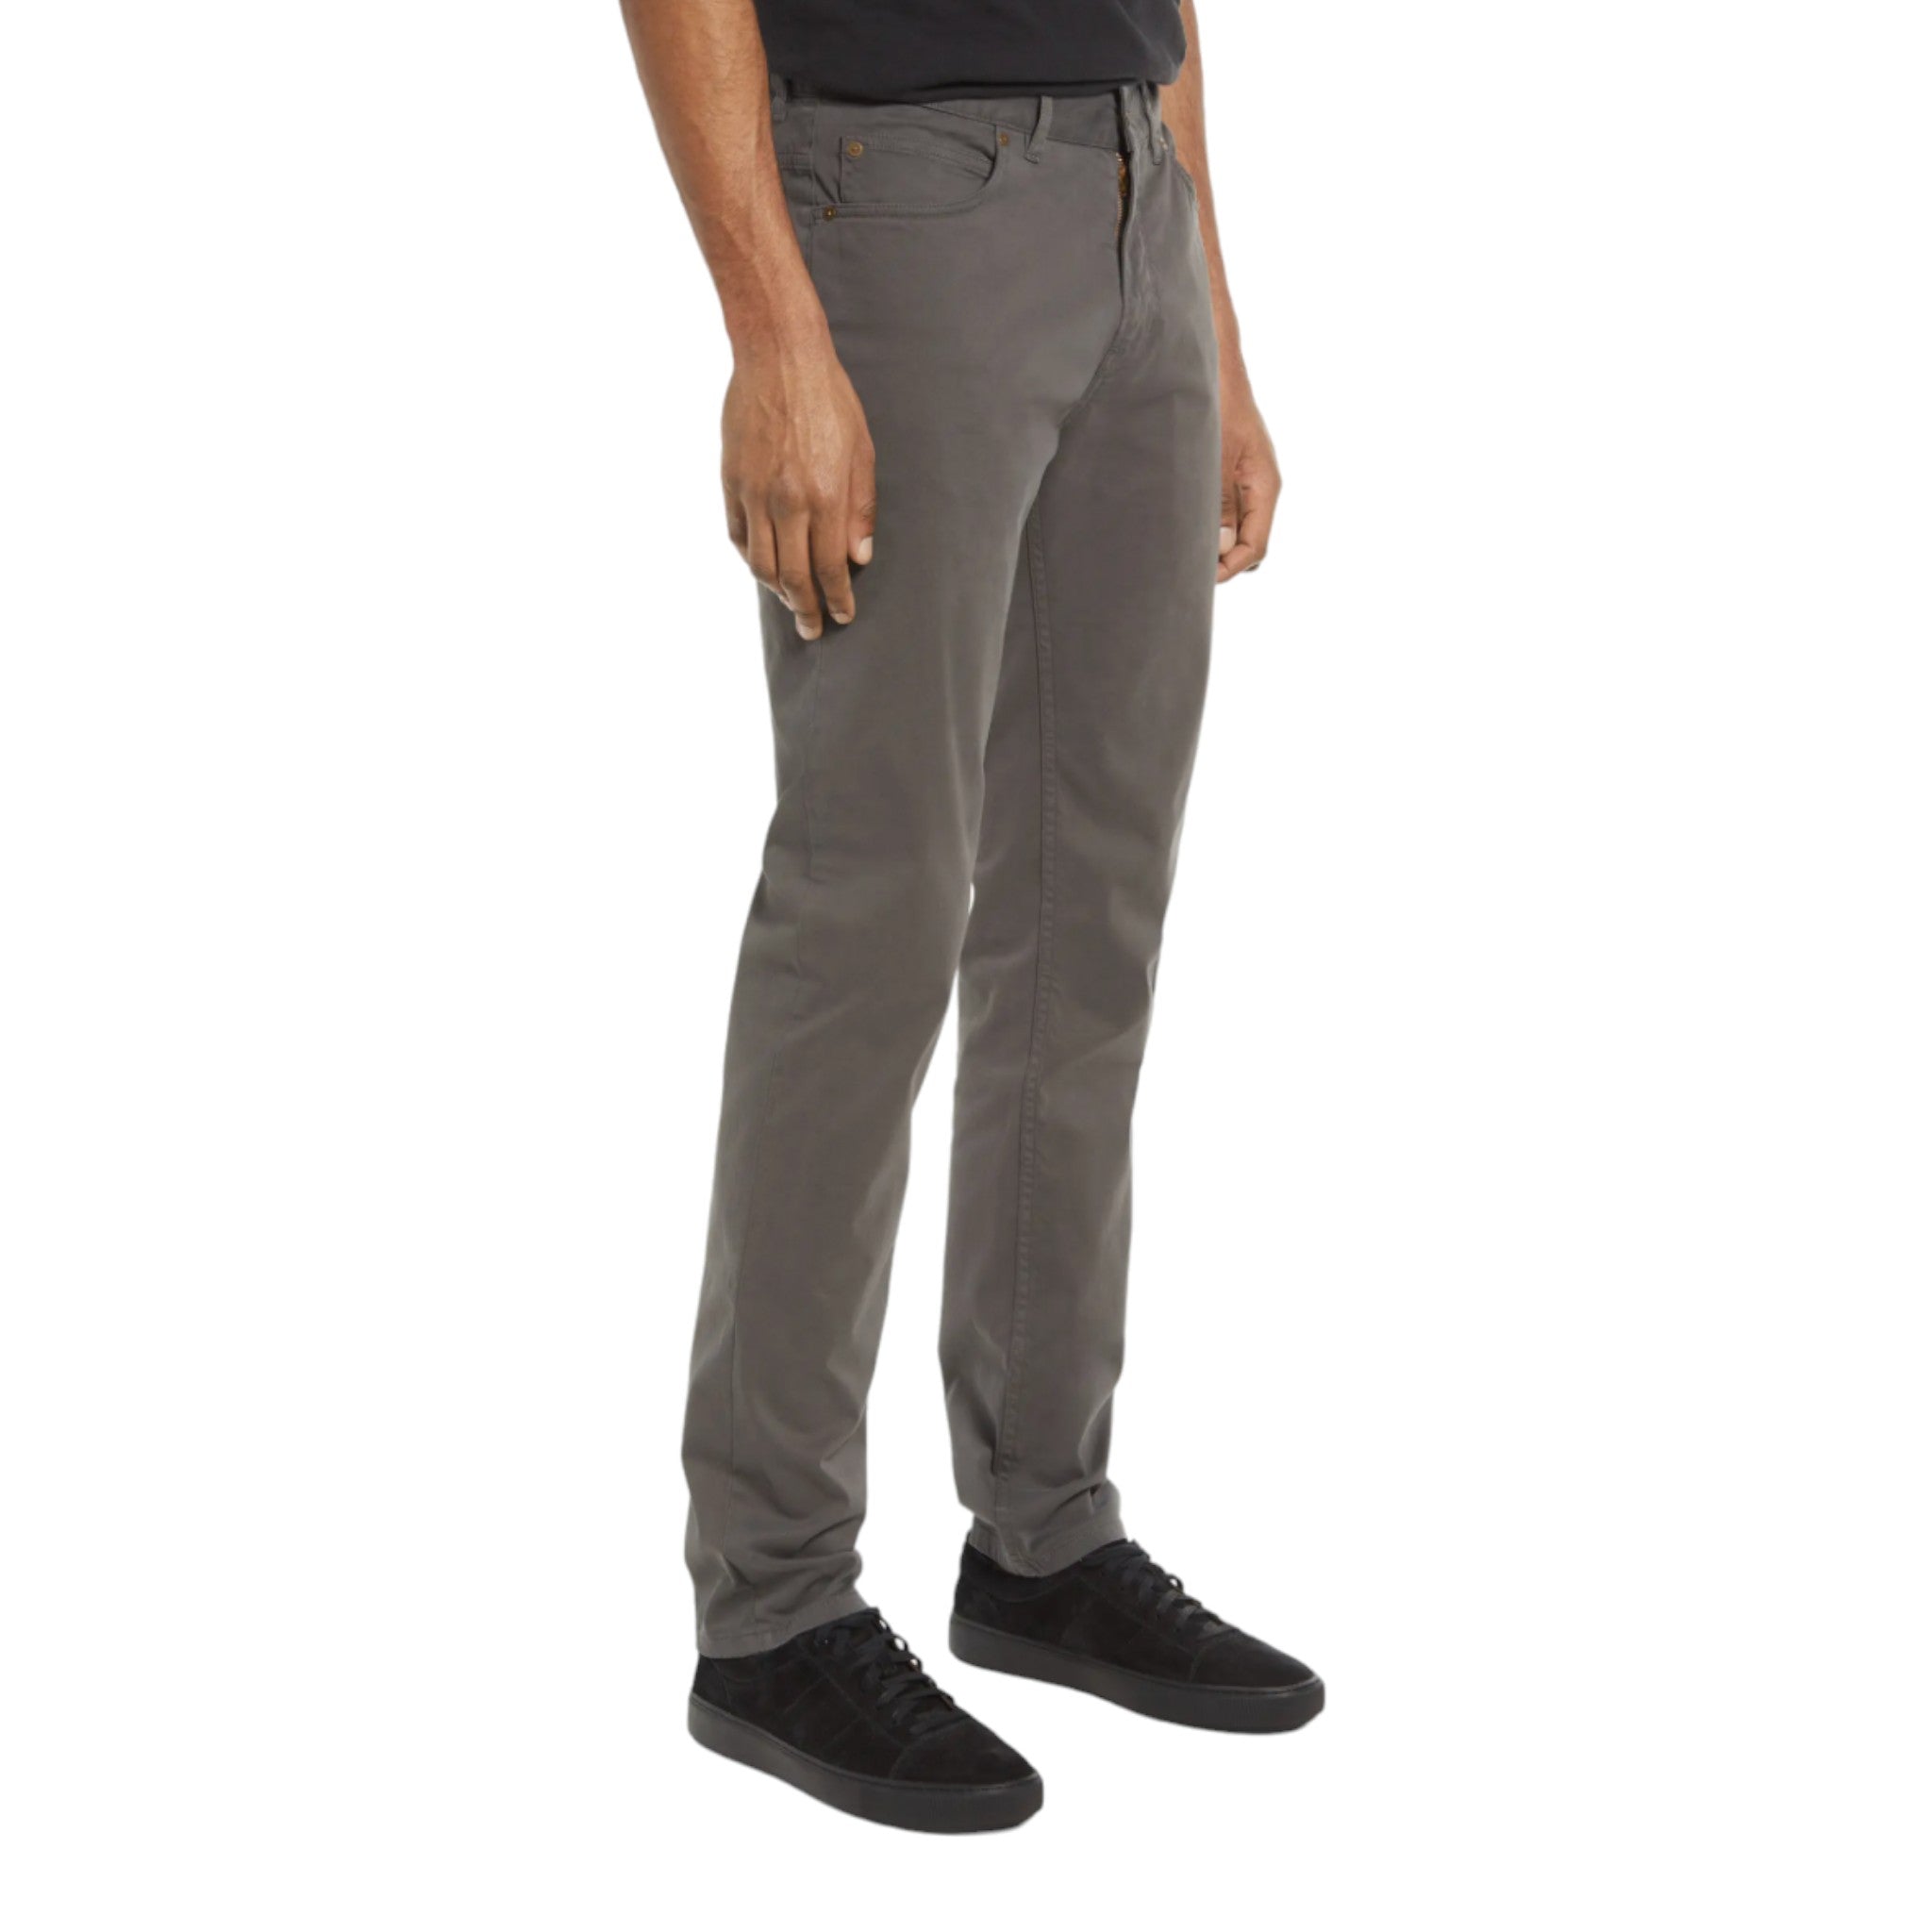 Grey fitted pant with button and zip closure and two front pockets